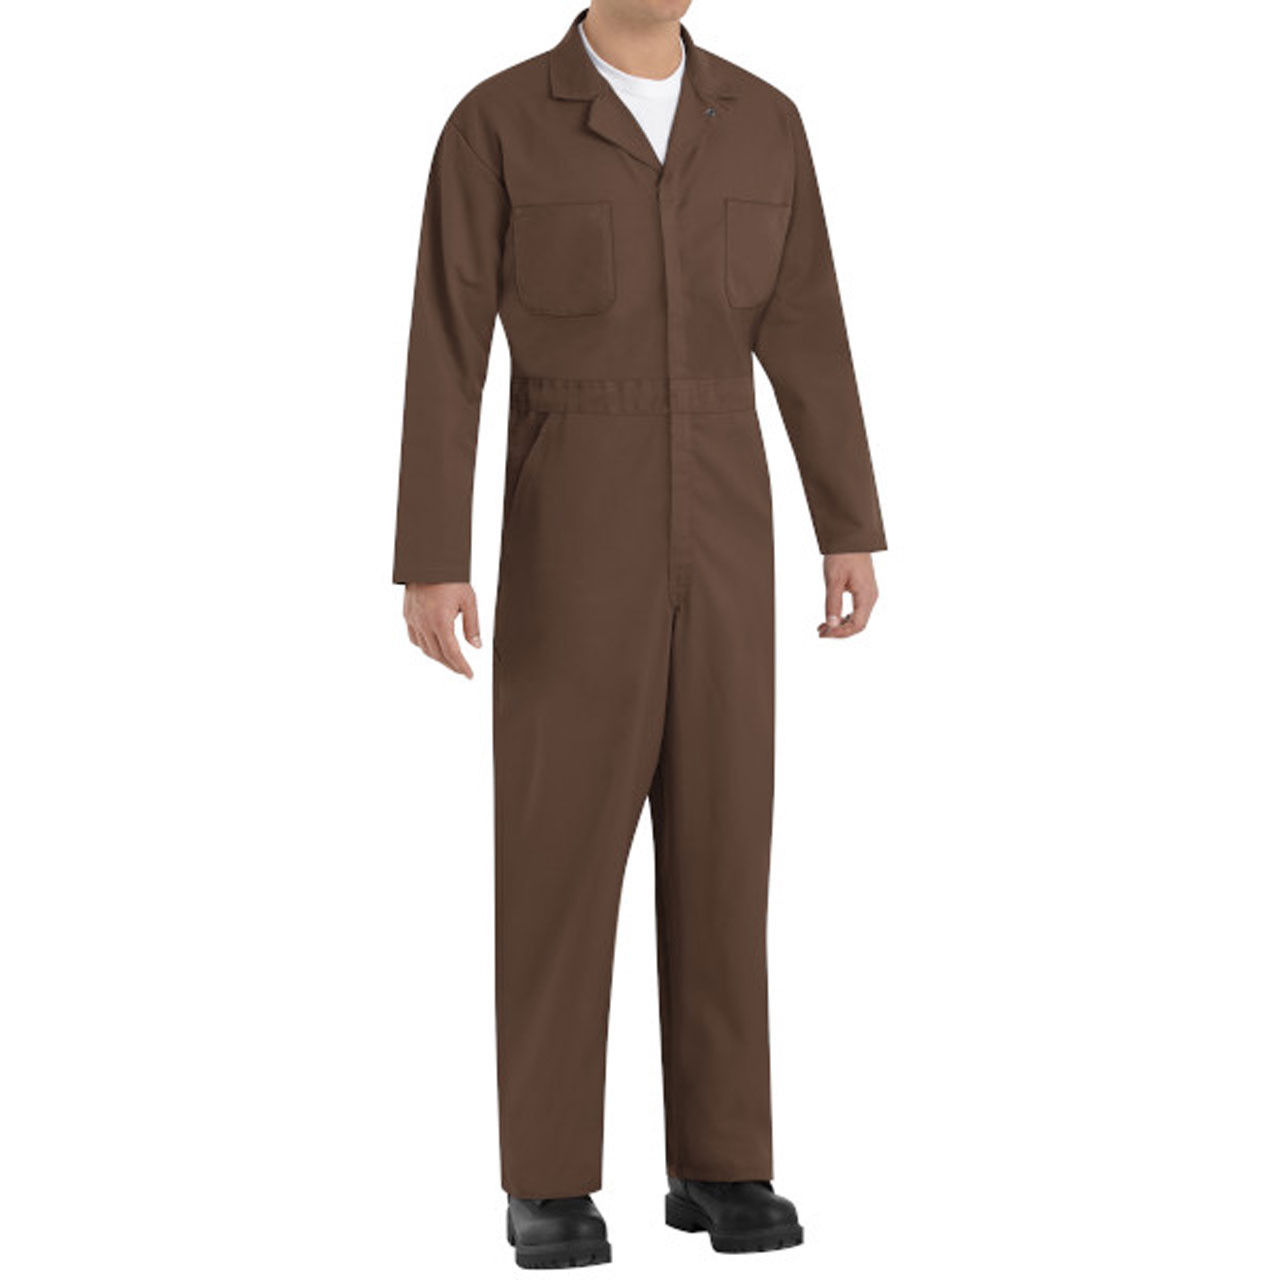 Where are the pockets located on the brown coveralls?